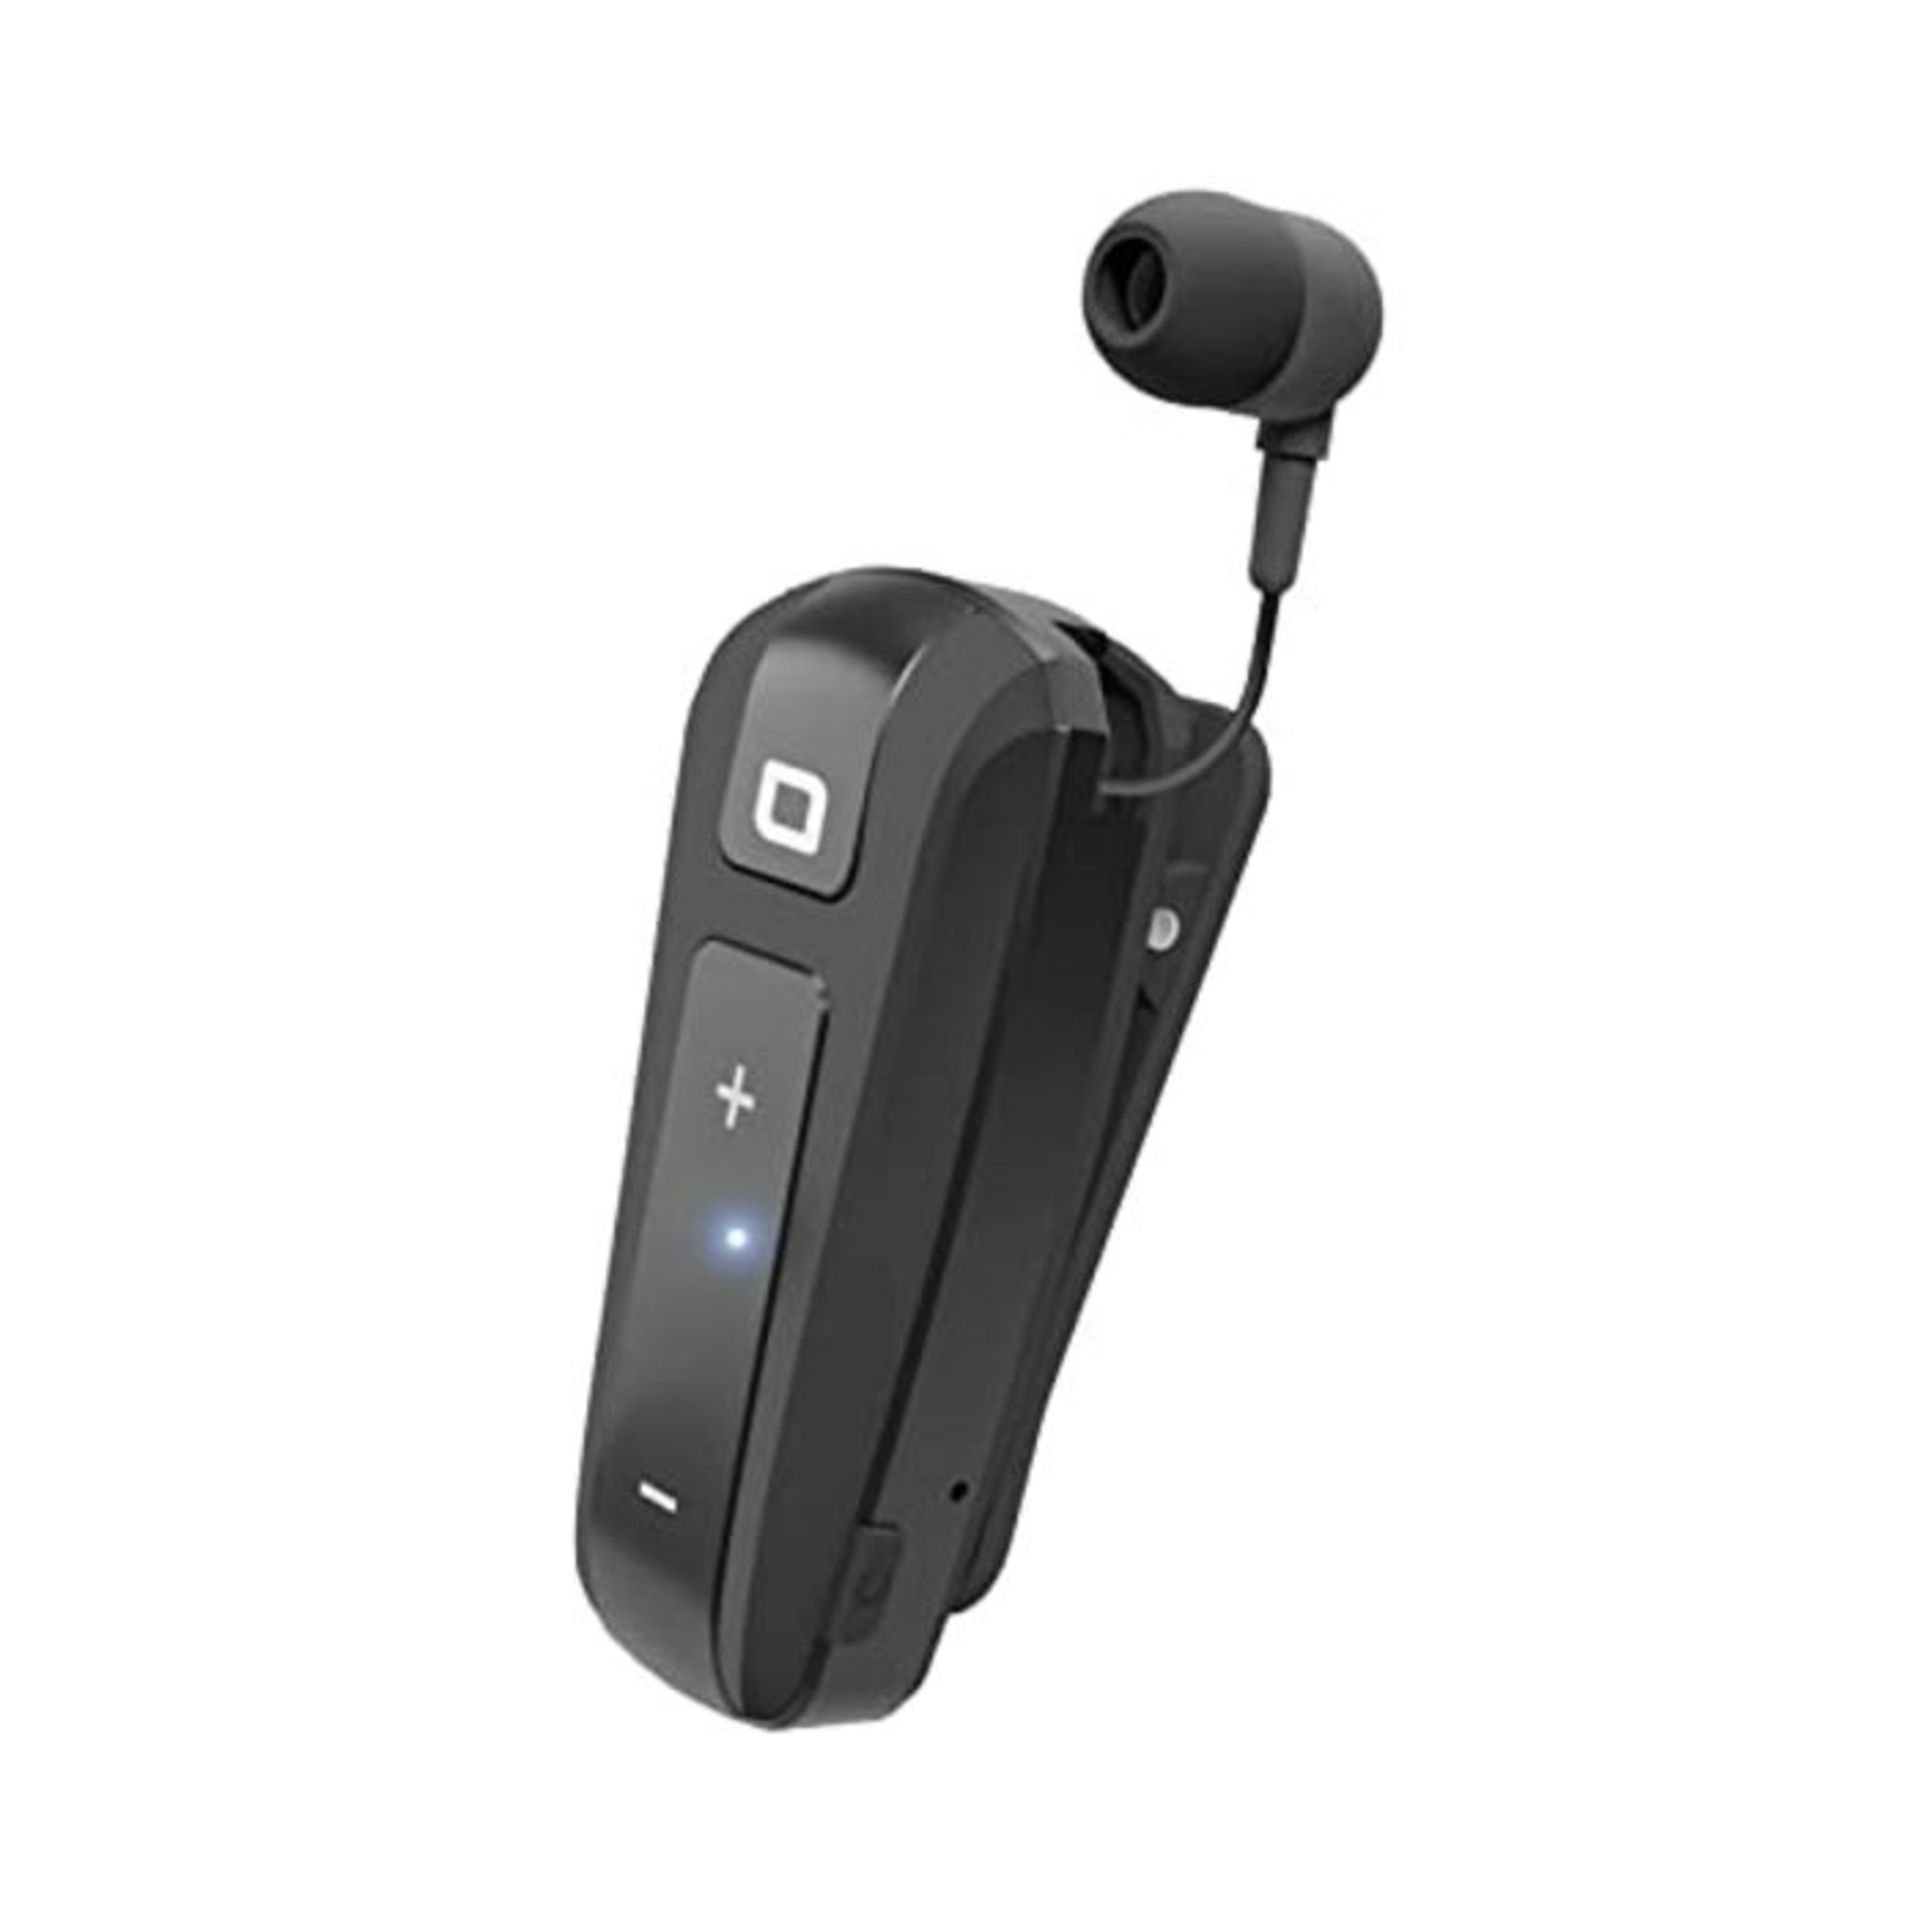 SBS Bluetooth Headset with Clip and Roll-up Wire Multipoint Technology to connect 2 de - Image 3 of 6